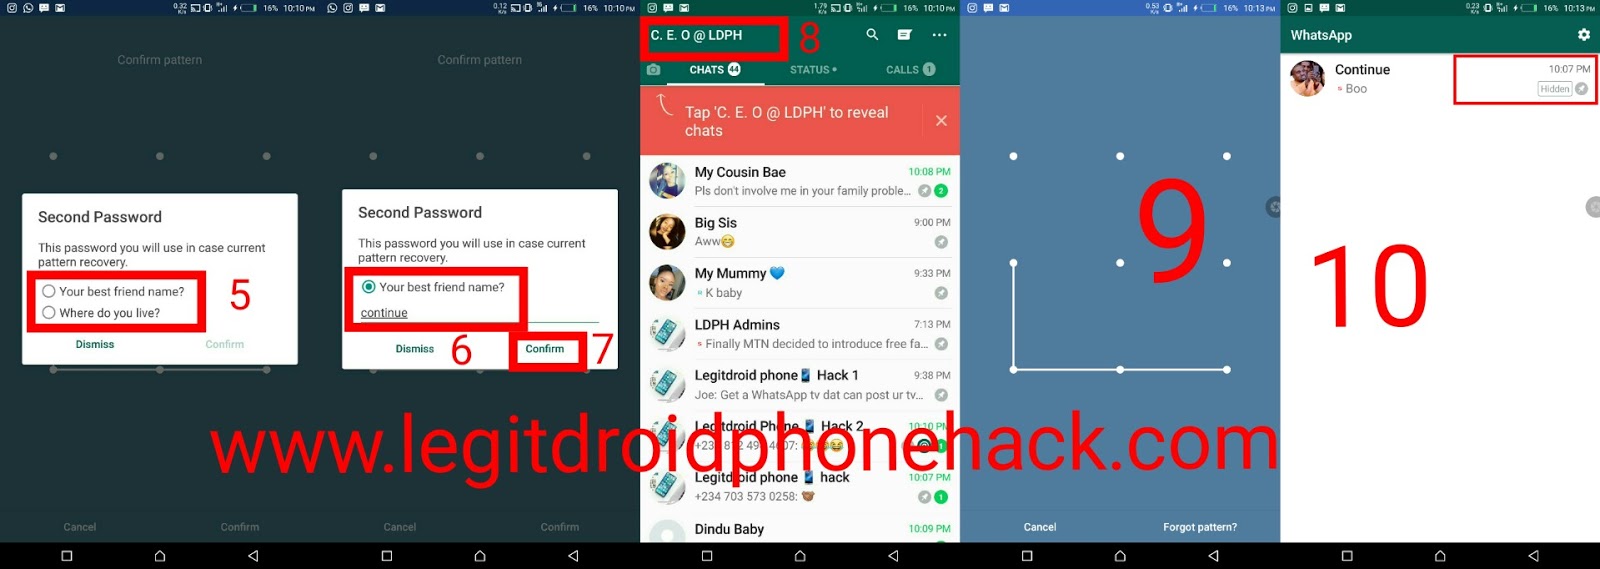 How to secretly hide chats on whatsapp